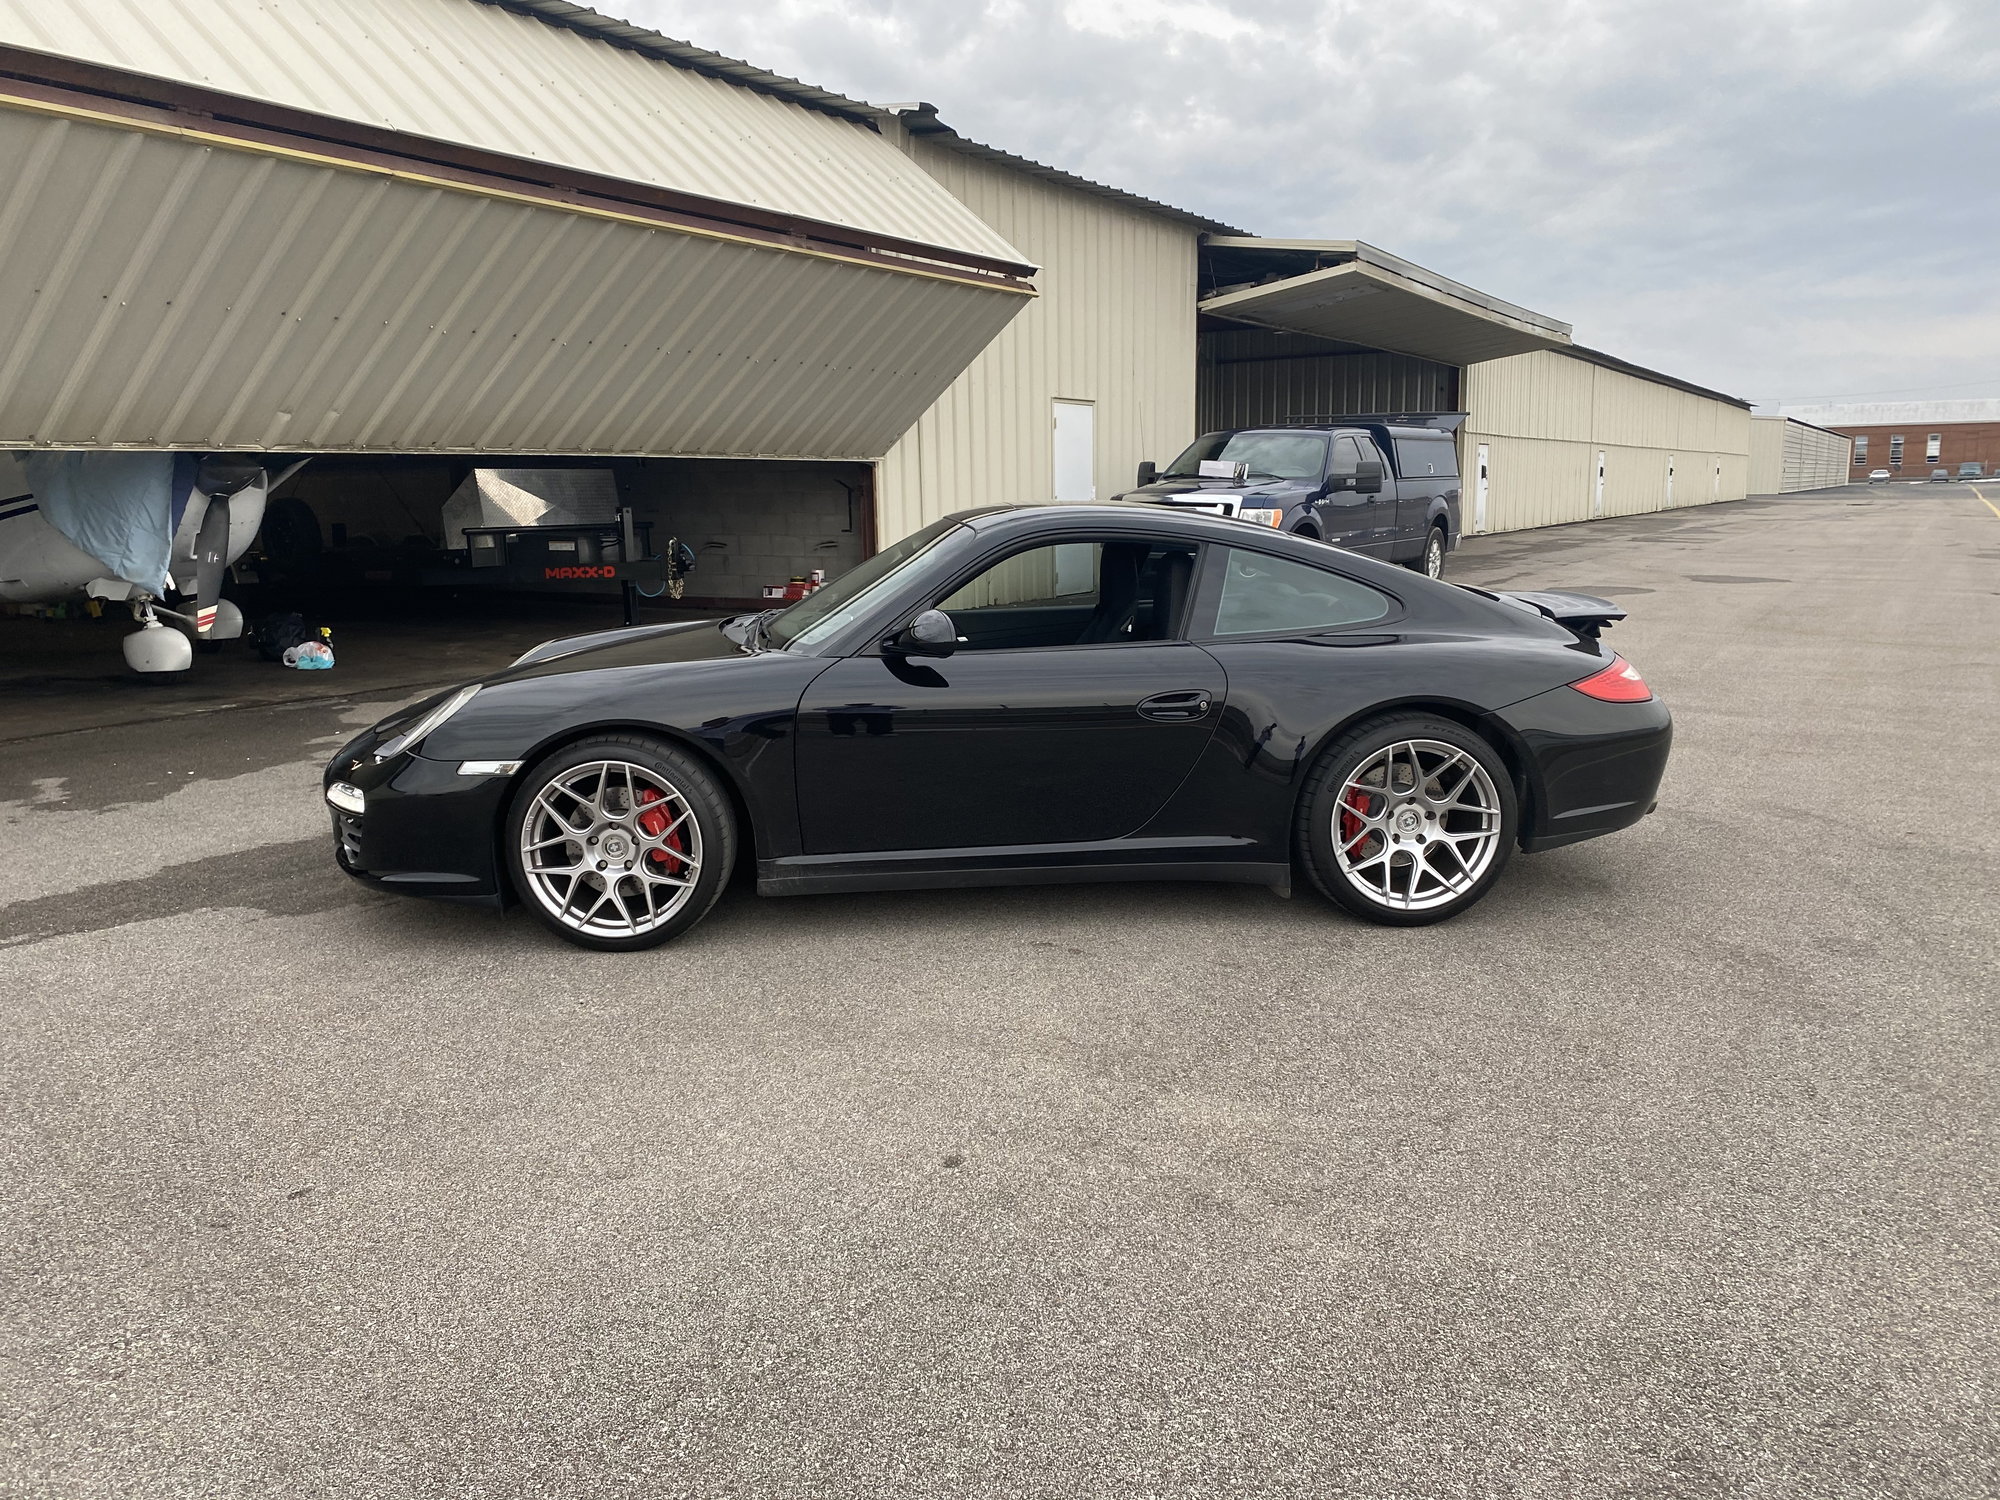 2010 Porsche 911 - 997.2 2010 Porsche 911 C4S 6 speed manual naturally aspirated turbo wide body - Used - VIN 12345678912345678 - 55,000 Miles - 6 cyl - AWD - Manual - Coupe - Black - Louisville, KY 40204, United States